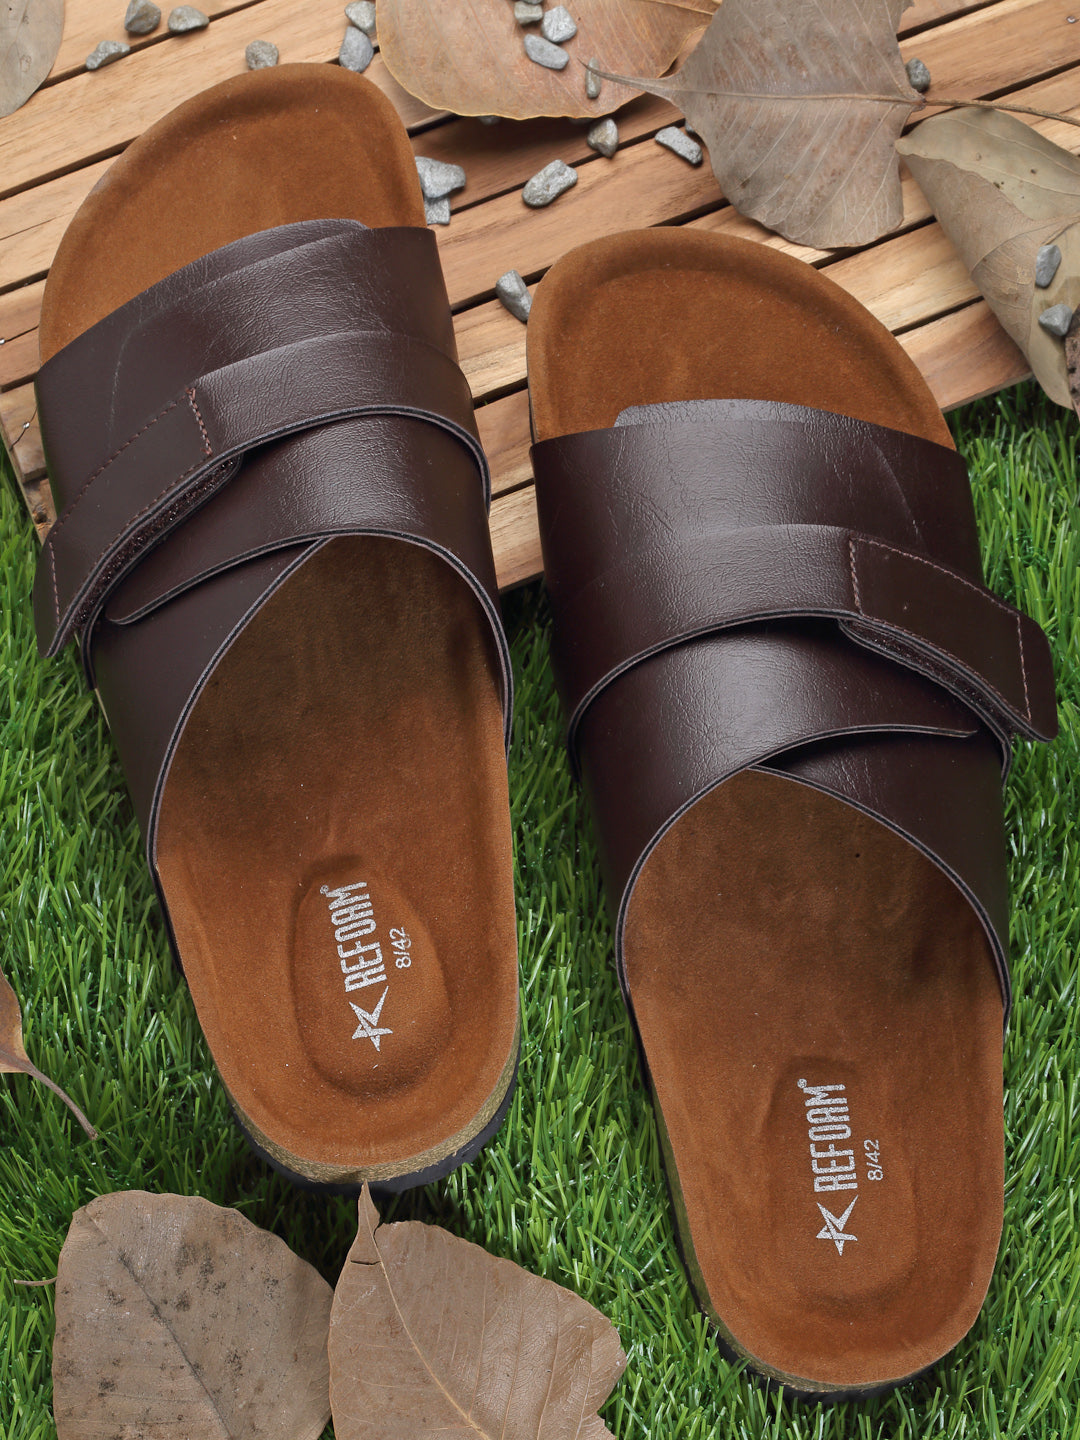 REFOAM Men's Brown Synthetic Leather Slip On Casual Sandals